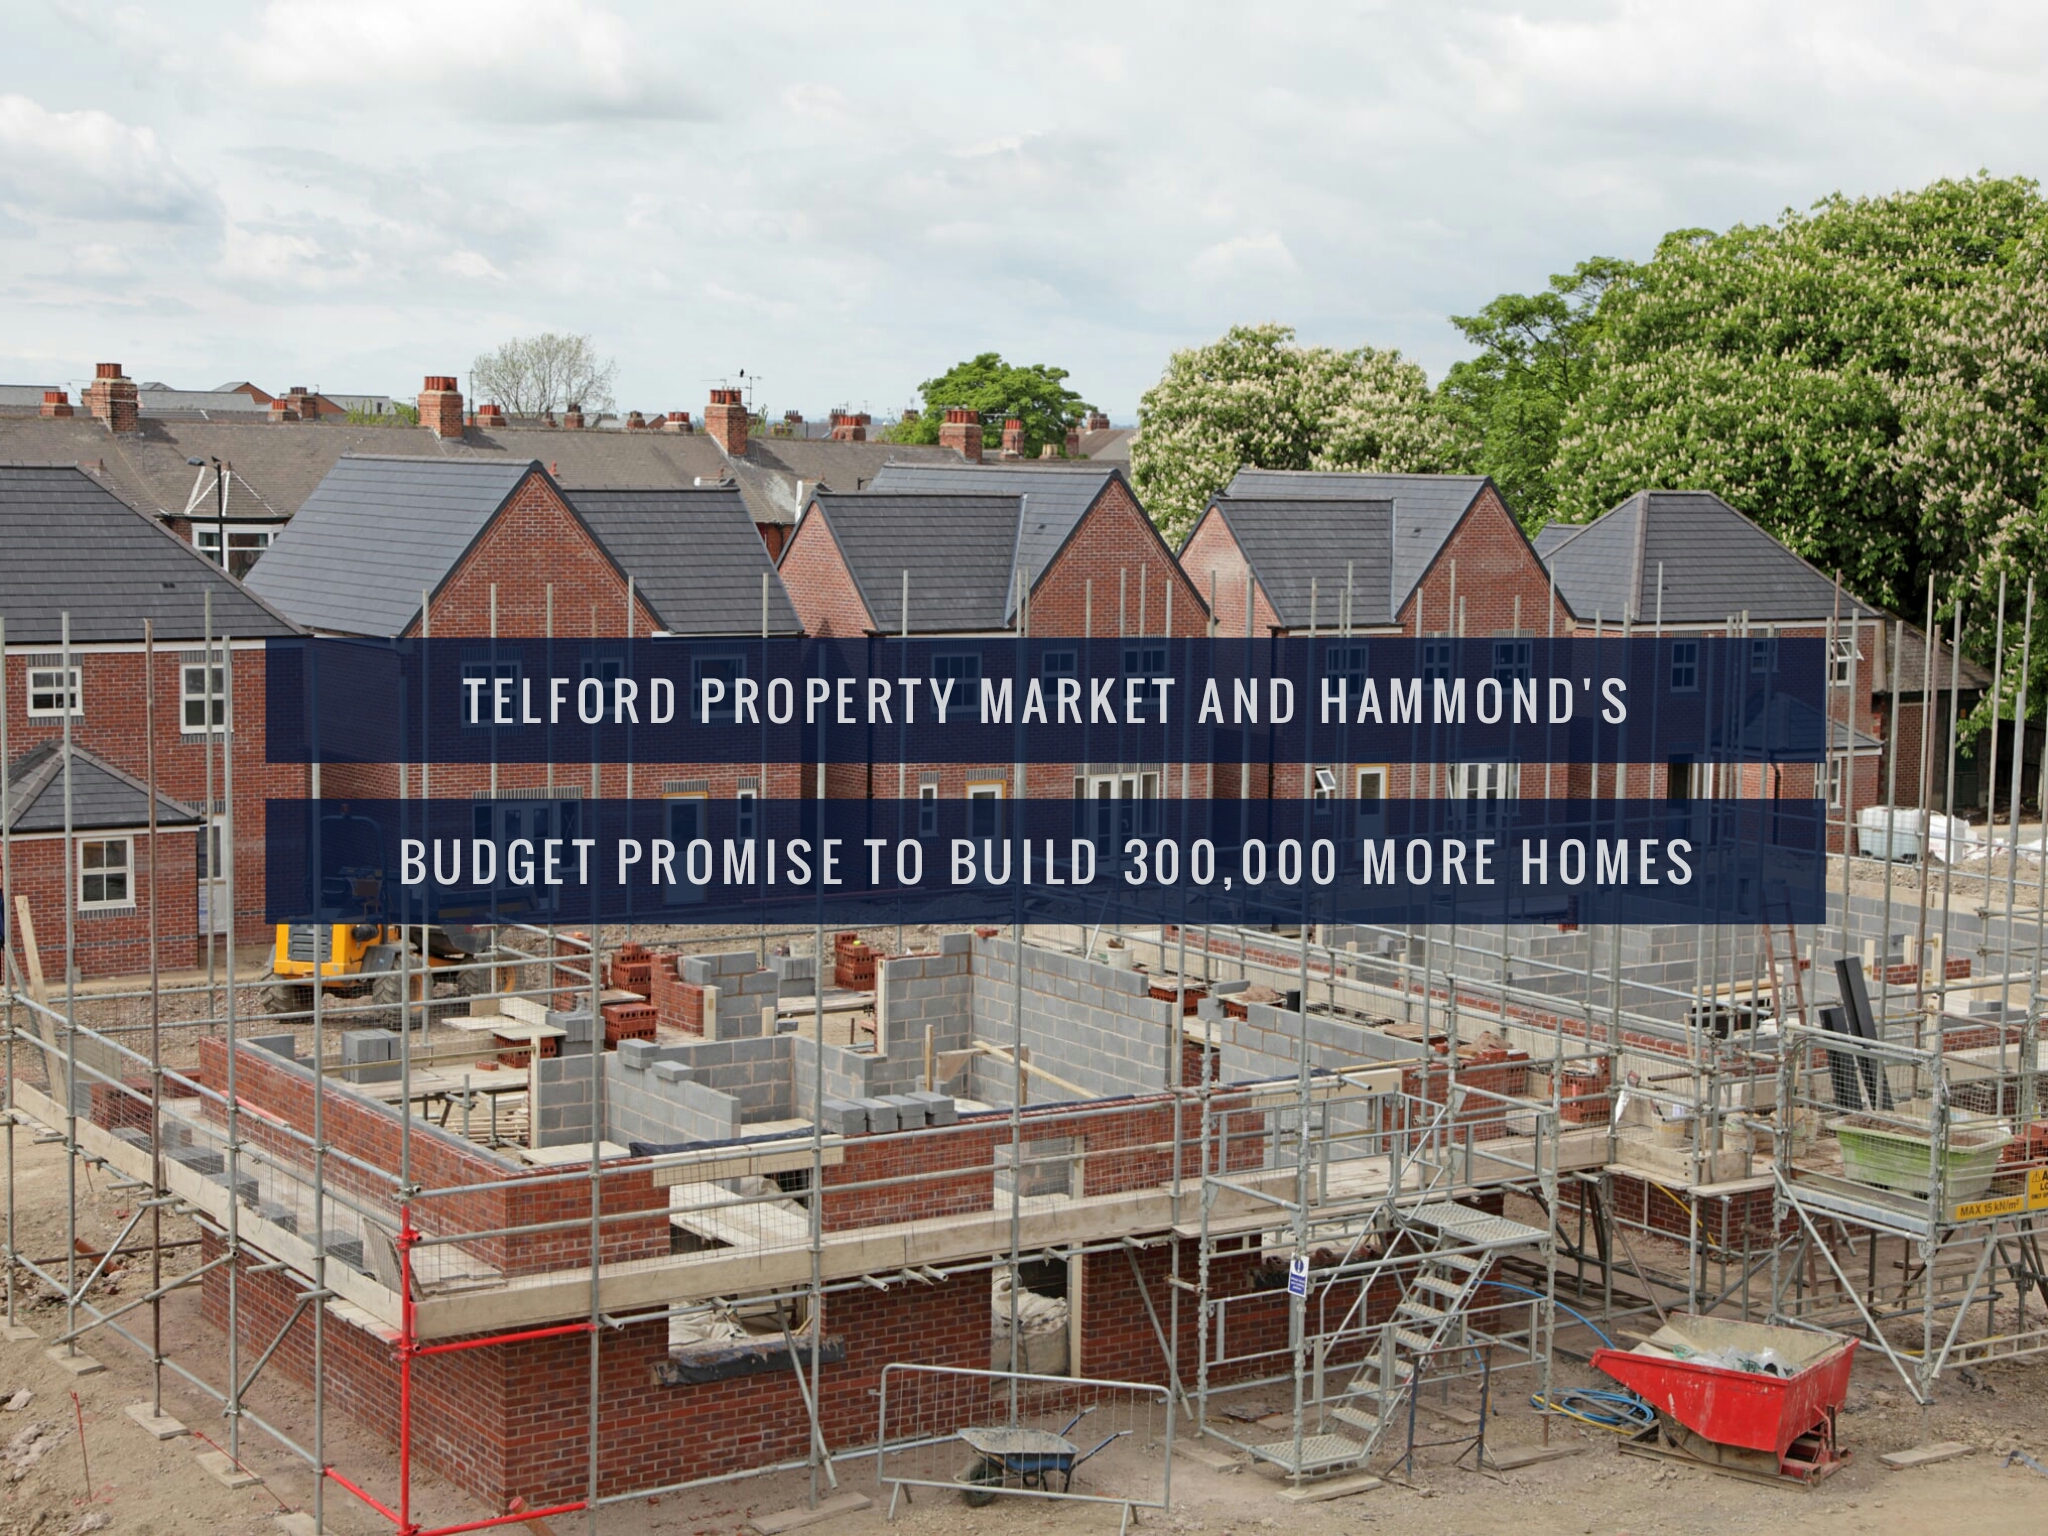 Telford Property Market and Hammond’s Budget Promise to Build 300,000 more homes